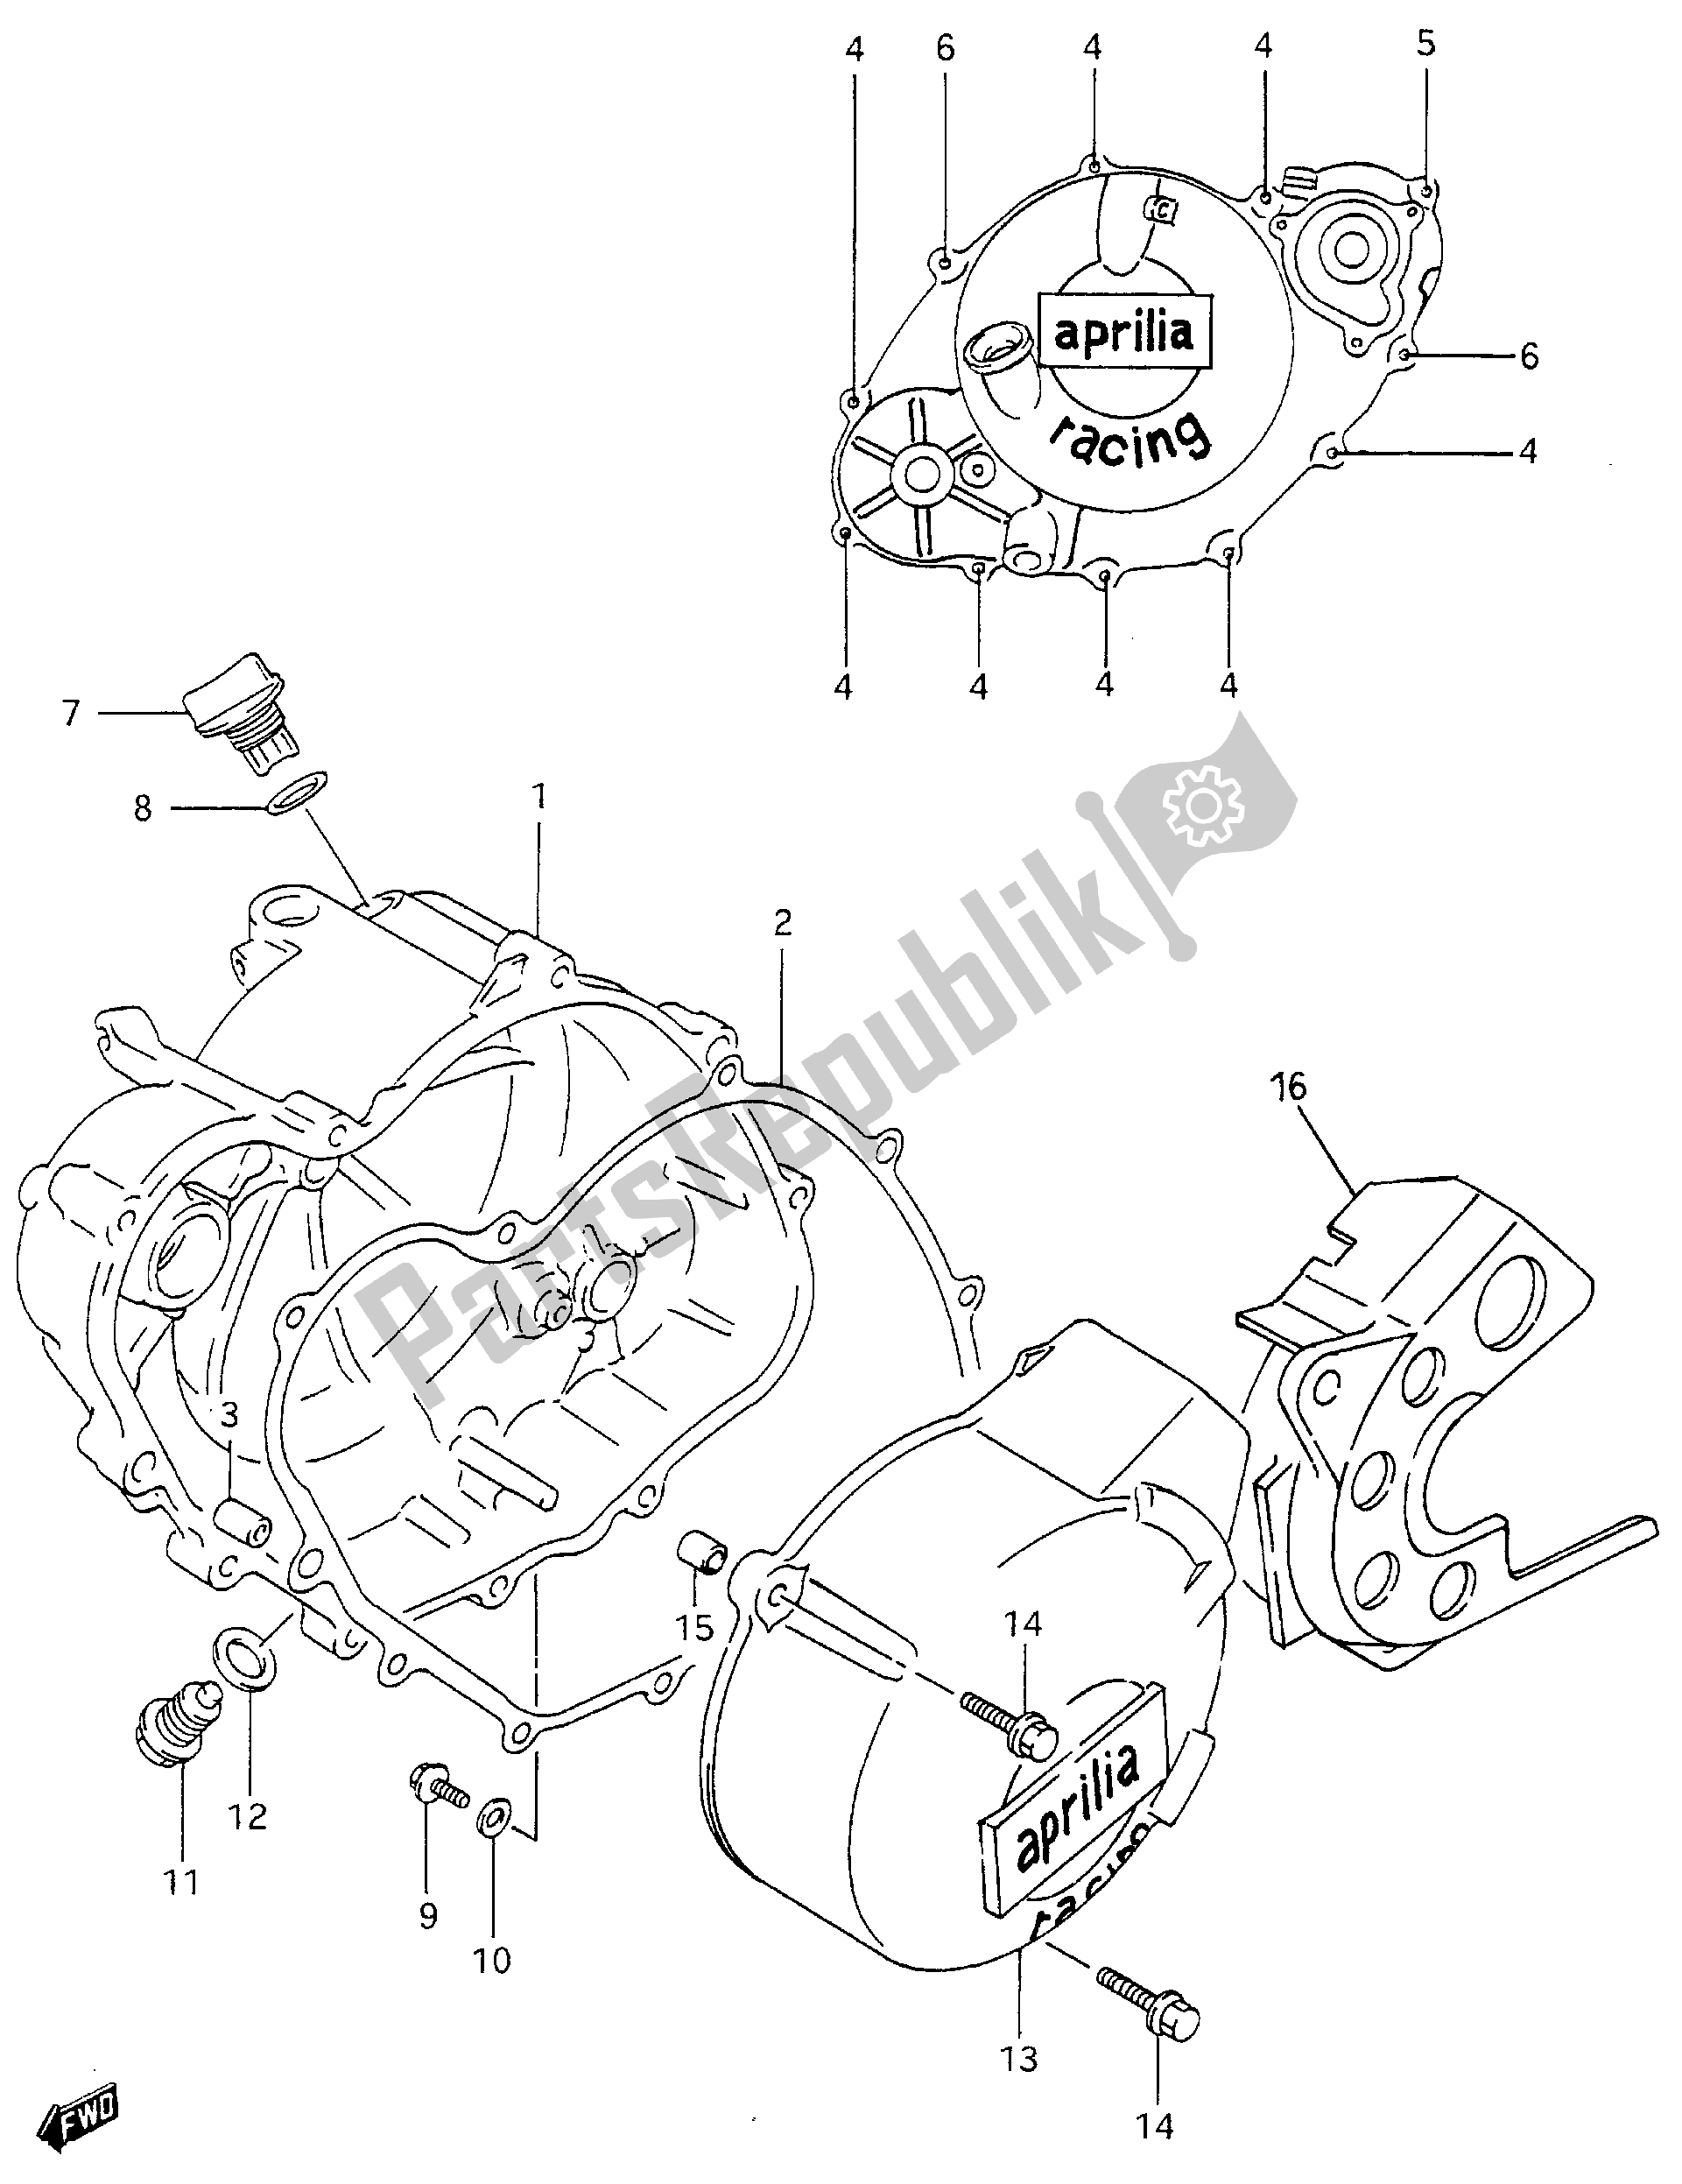 All parts for the Crankcase Covers of the Aprilia RS 250 1994